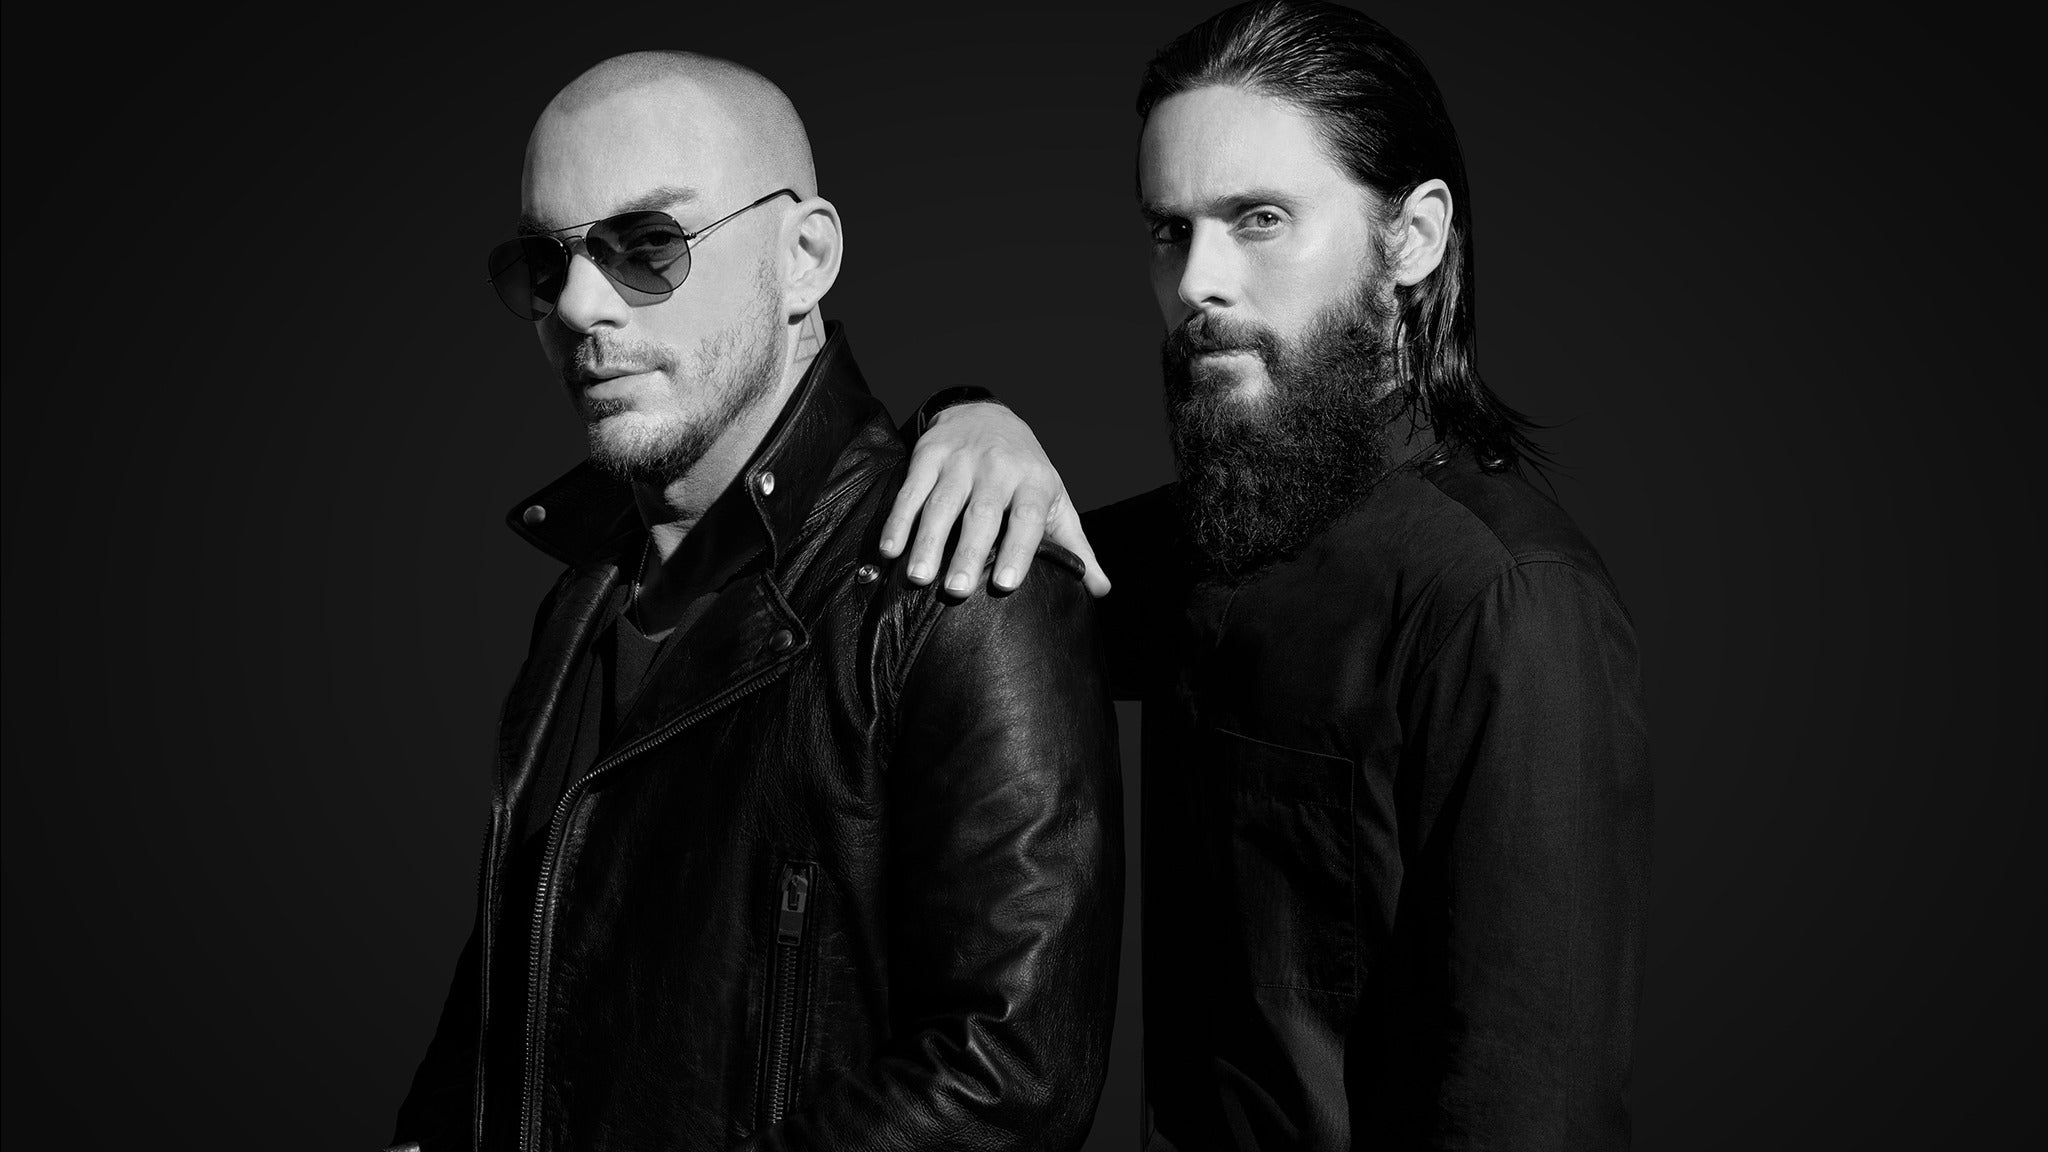 Official Lollapalooza Aftershow featuring Thirty Seconds to Mars in Chicago promo photo for Citi® Cardmember Preferred presale offer code